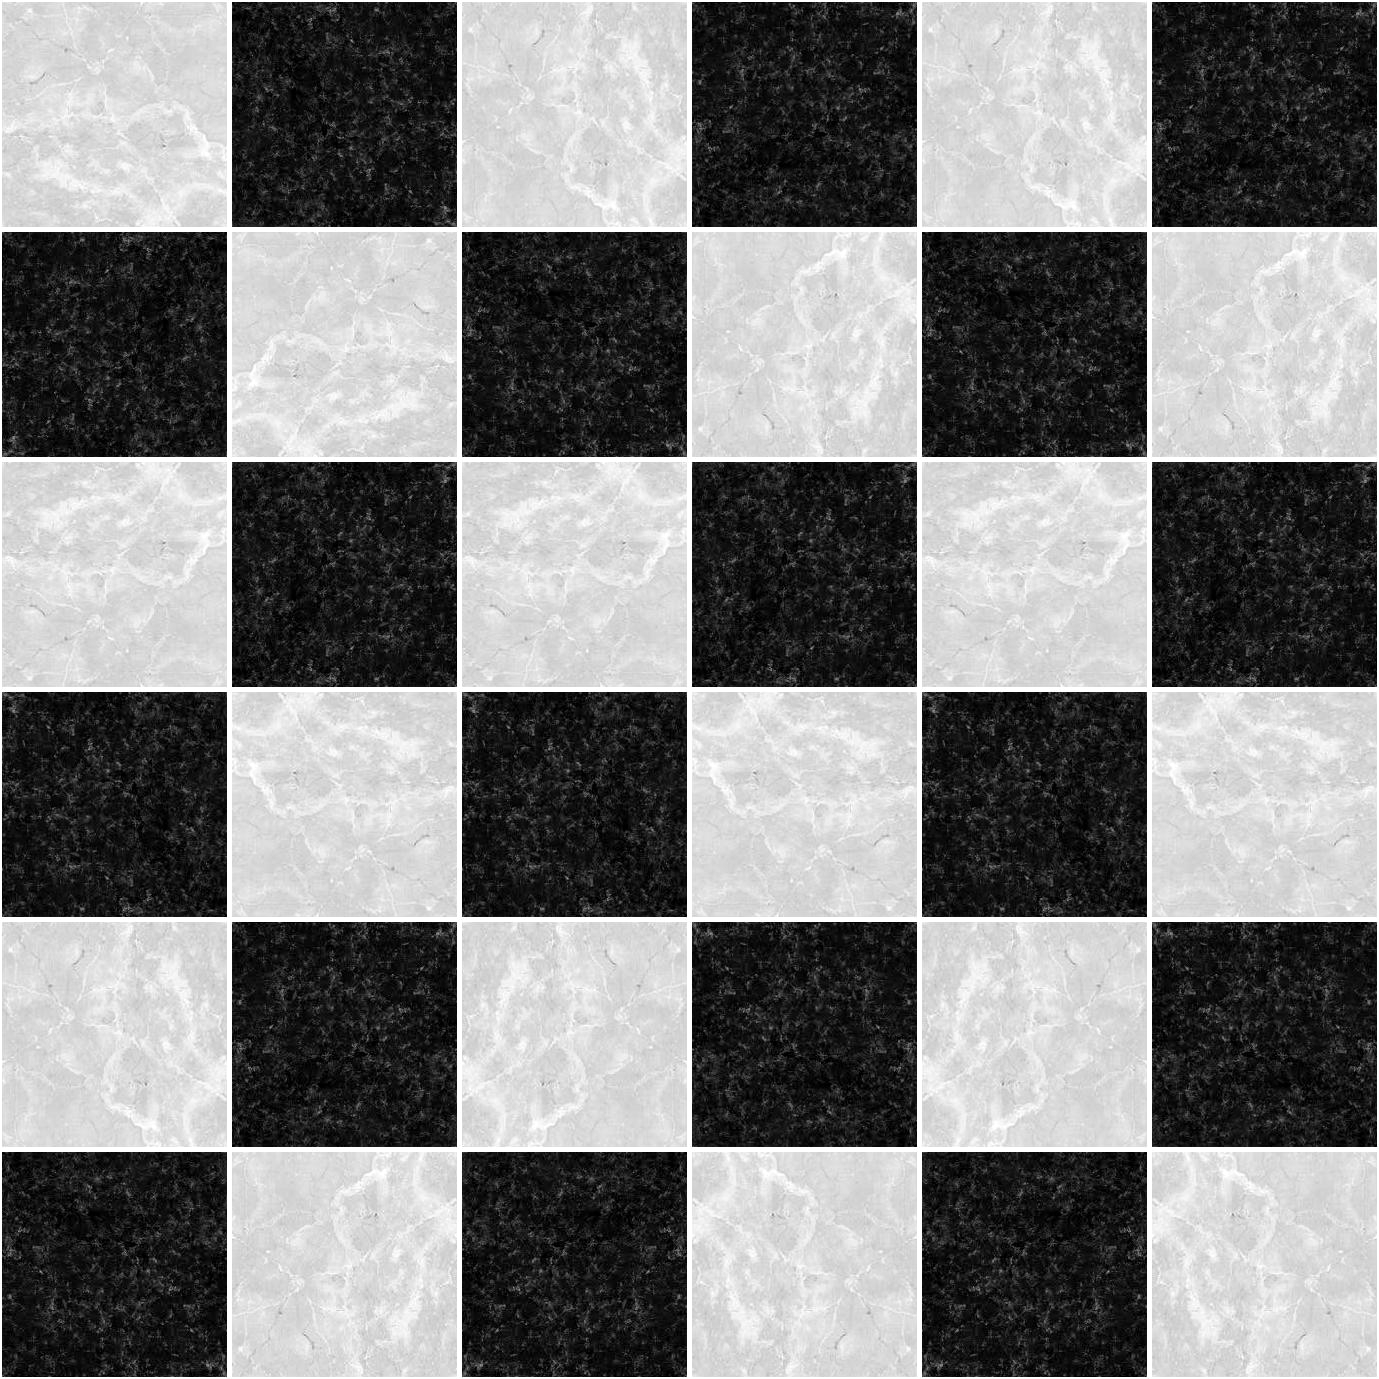 Agreeable Checkerboard Floor Related Keywords Amp Suggestions ...